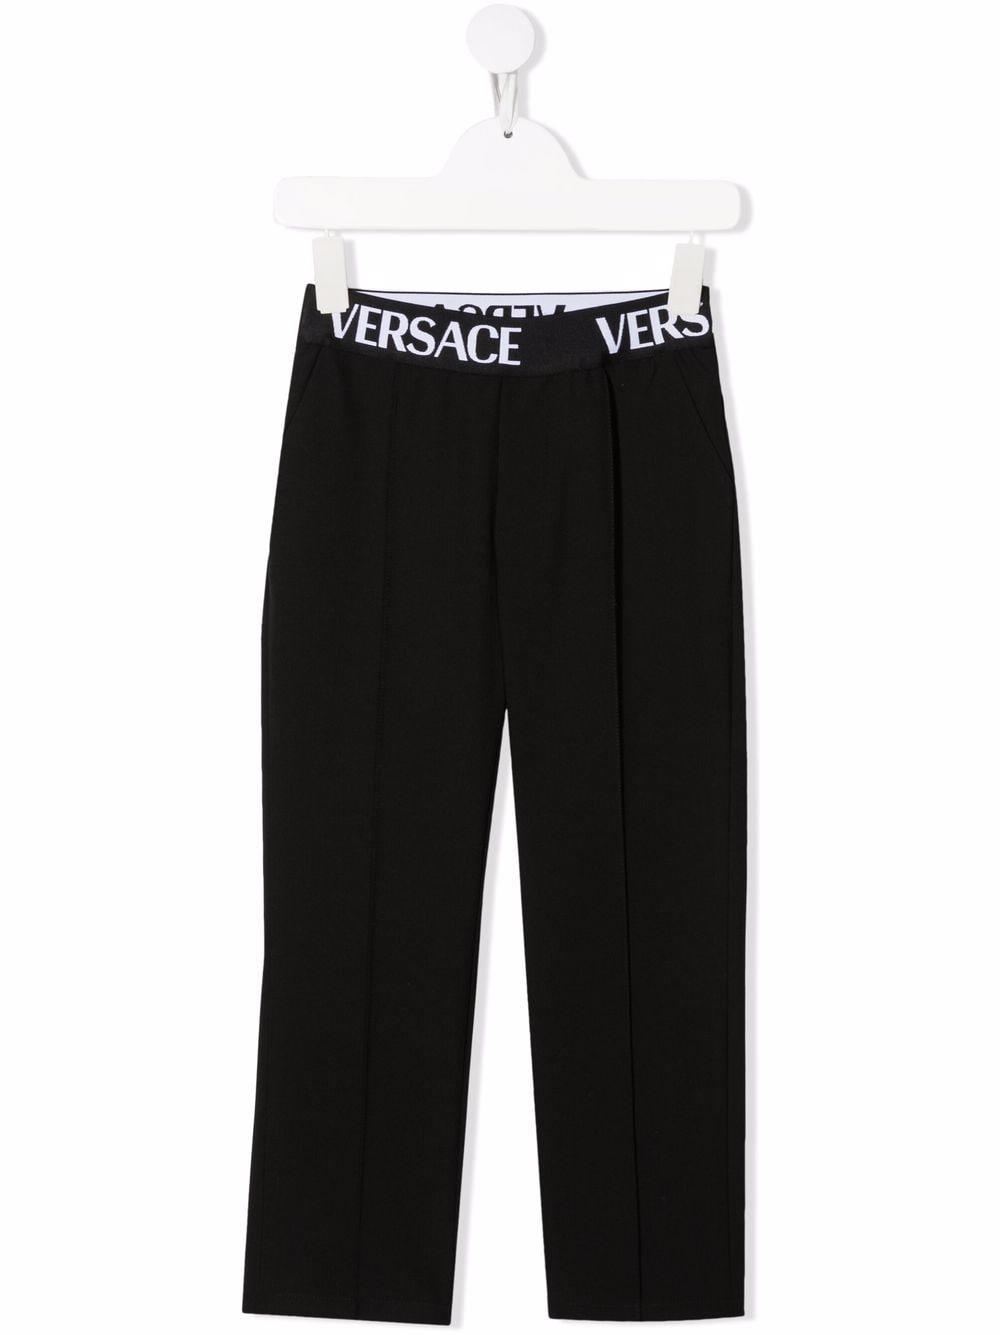 VERSACE TROUSERS WITH LOGOED ELASTIC